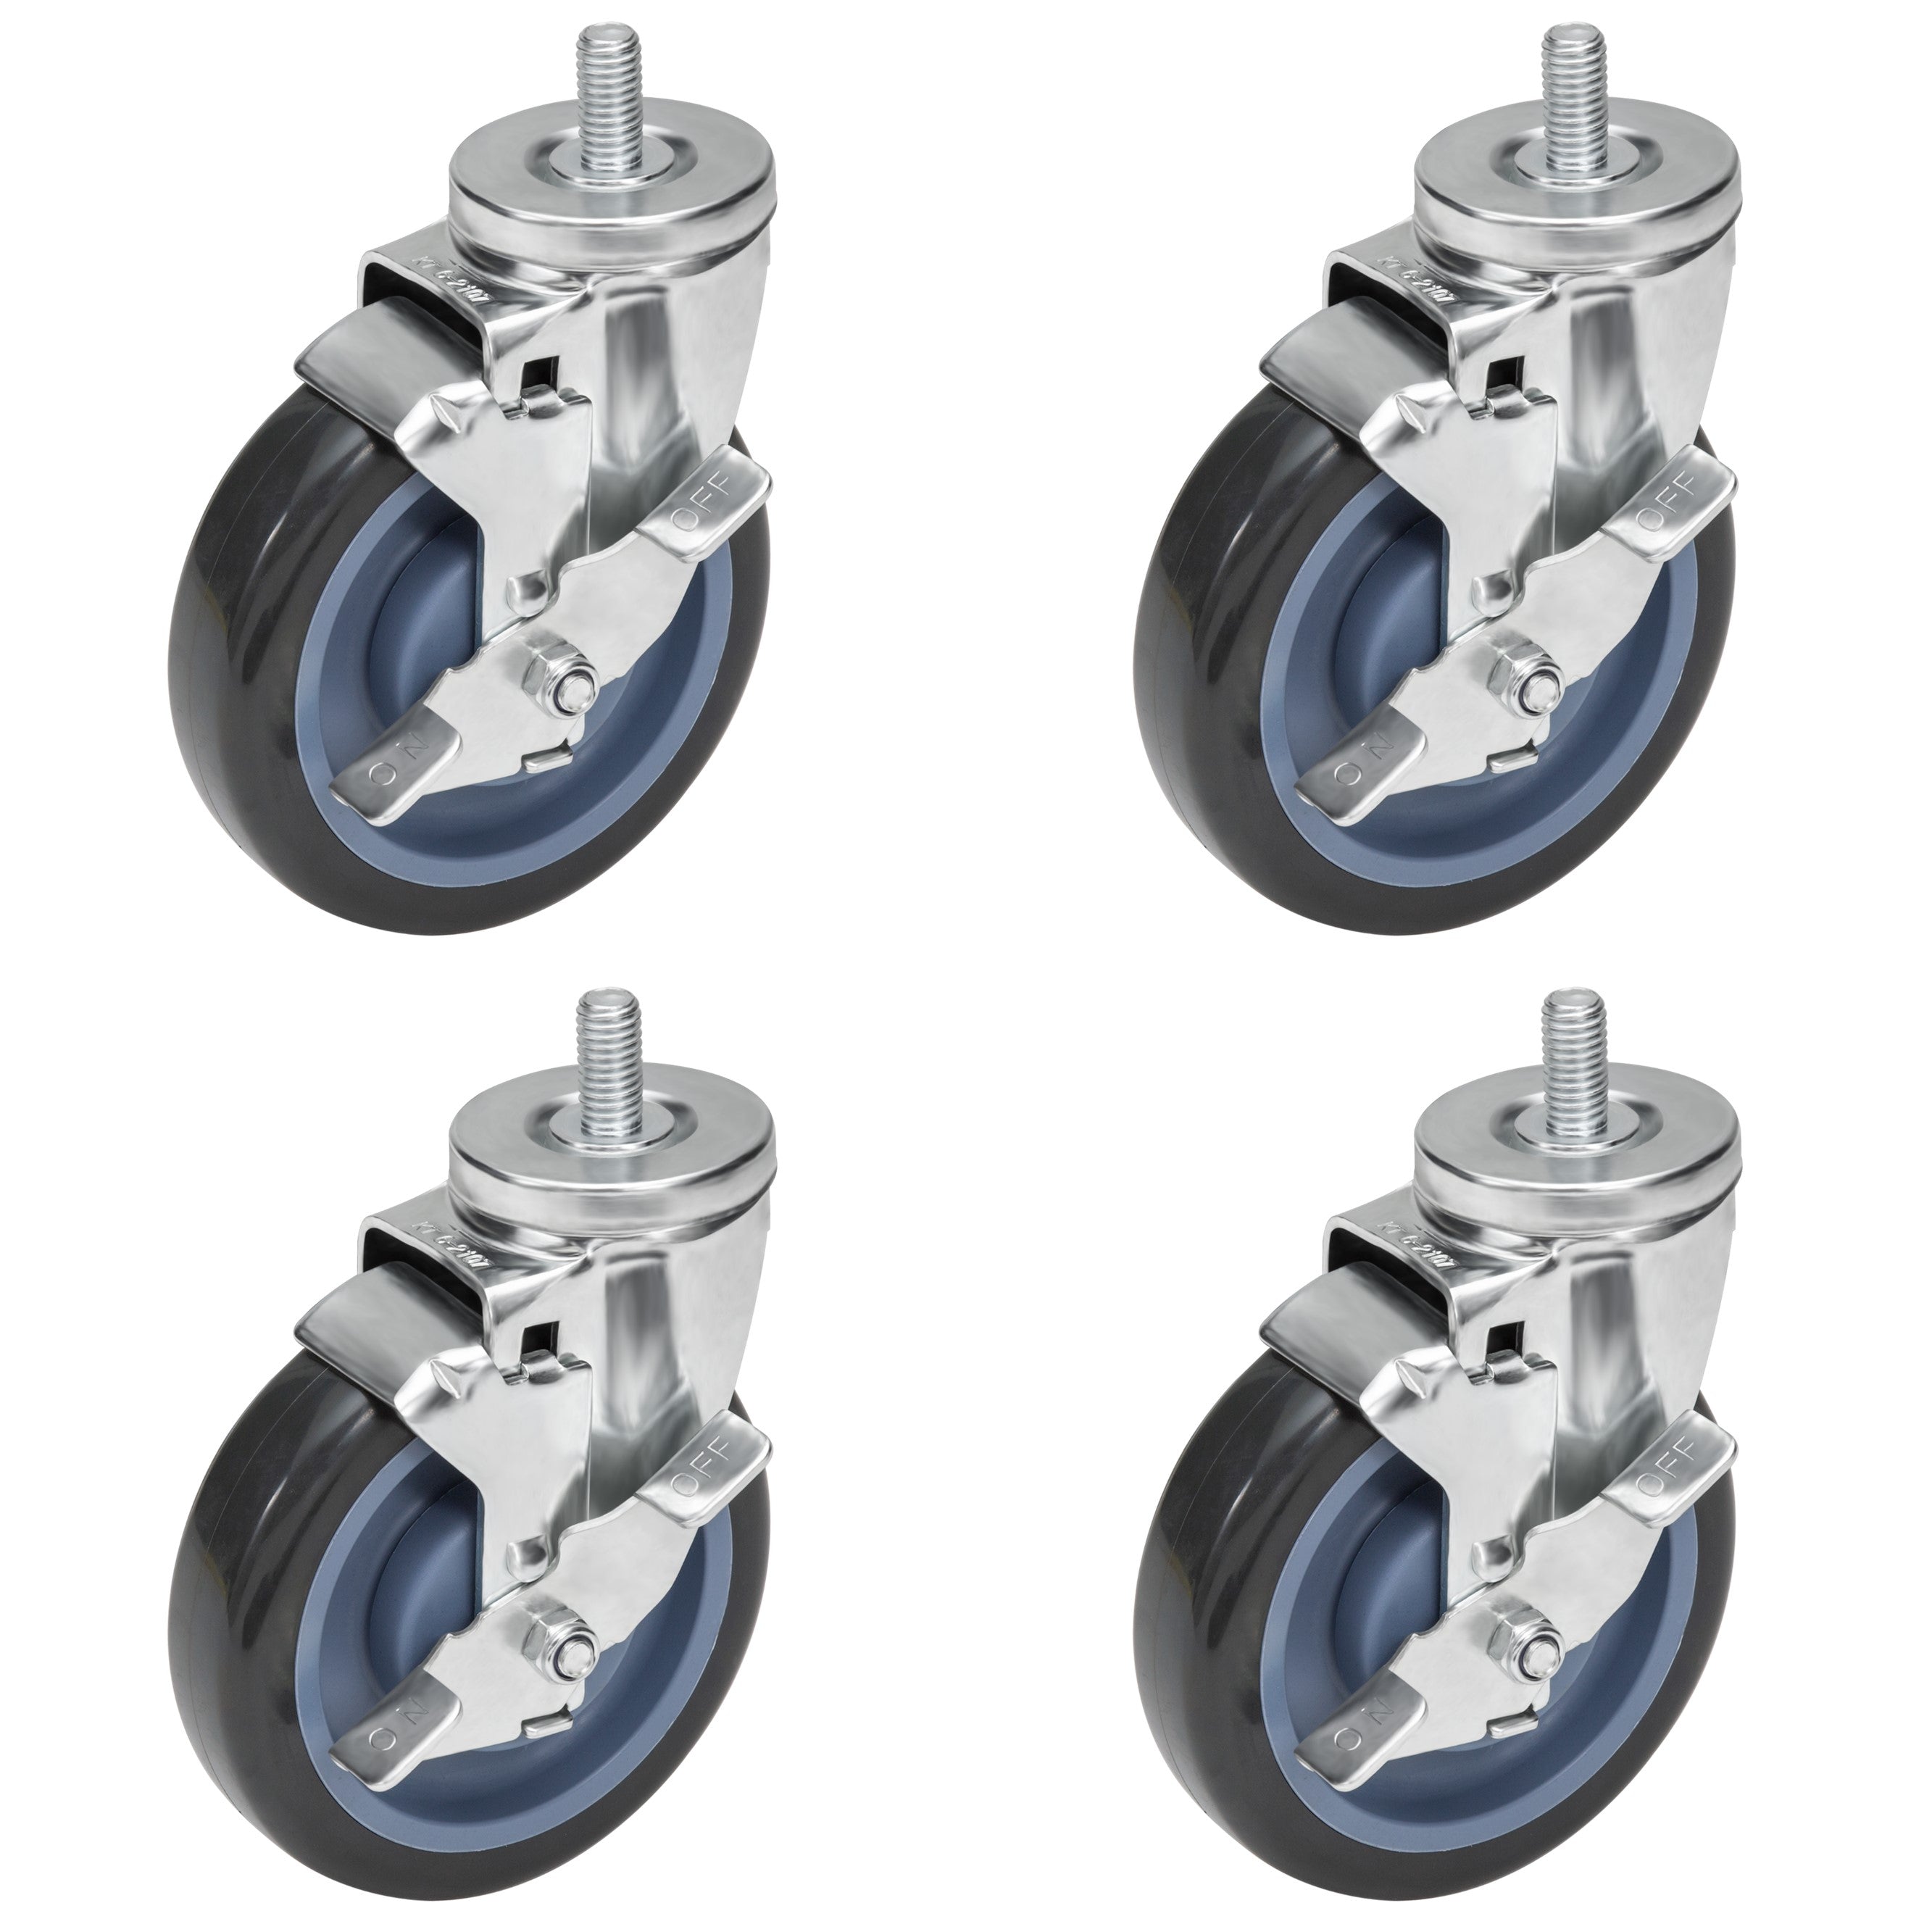 GSW 5" Caster Replacement Cart Wheels, Polyurethane Stem Casters Set of 4 for GSW Cart (C-SCE), Platform Cart, Industrial Cart with Loading Capacity of 1480 Lbs (Swivel with Brake)